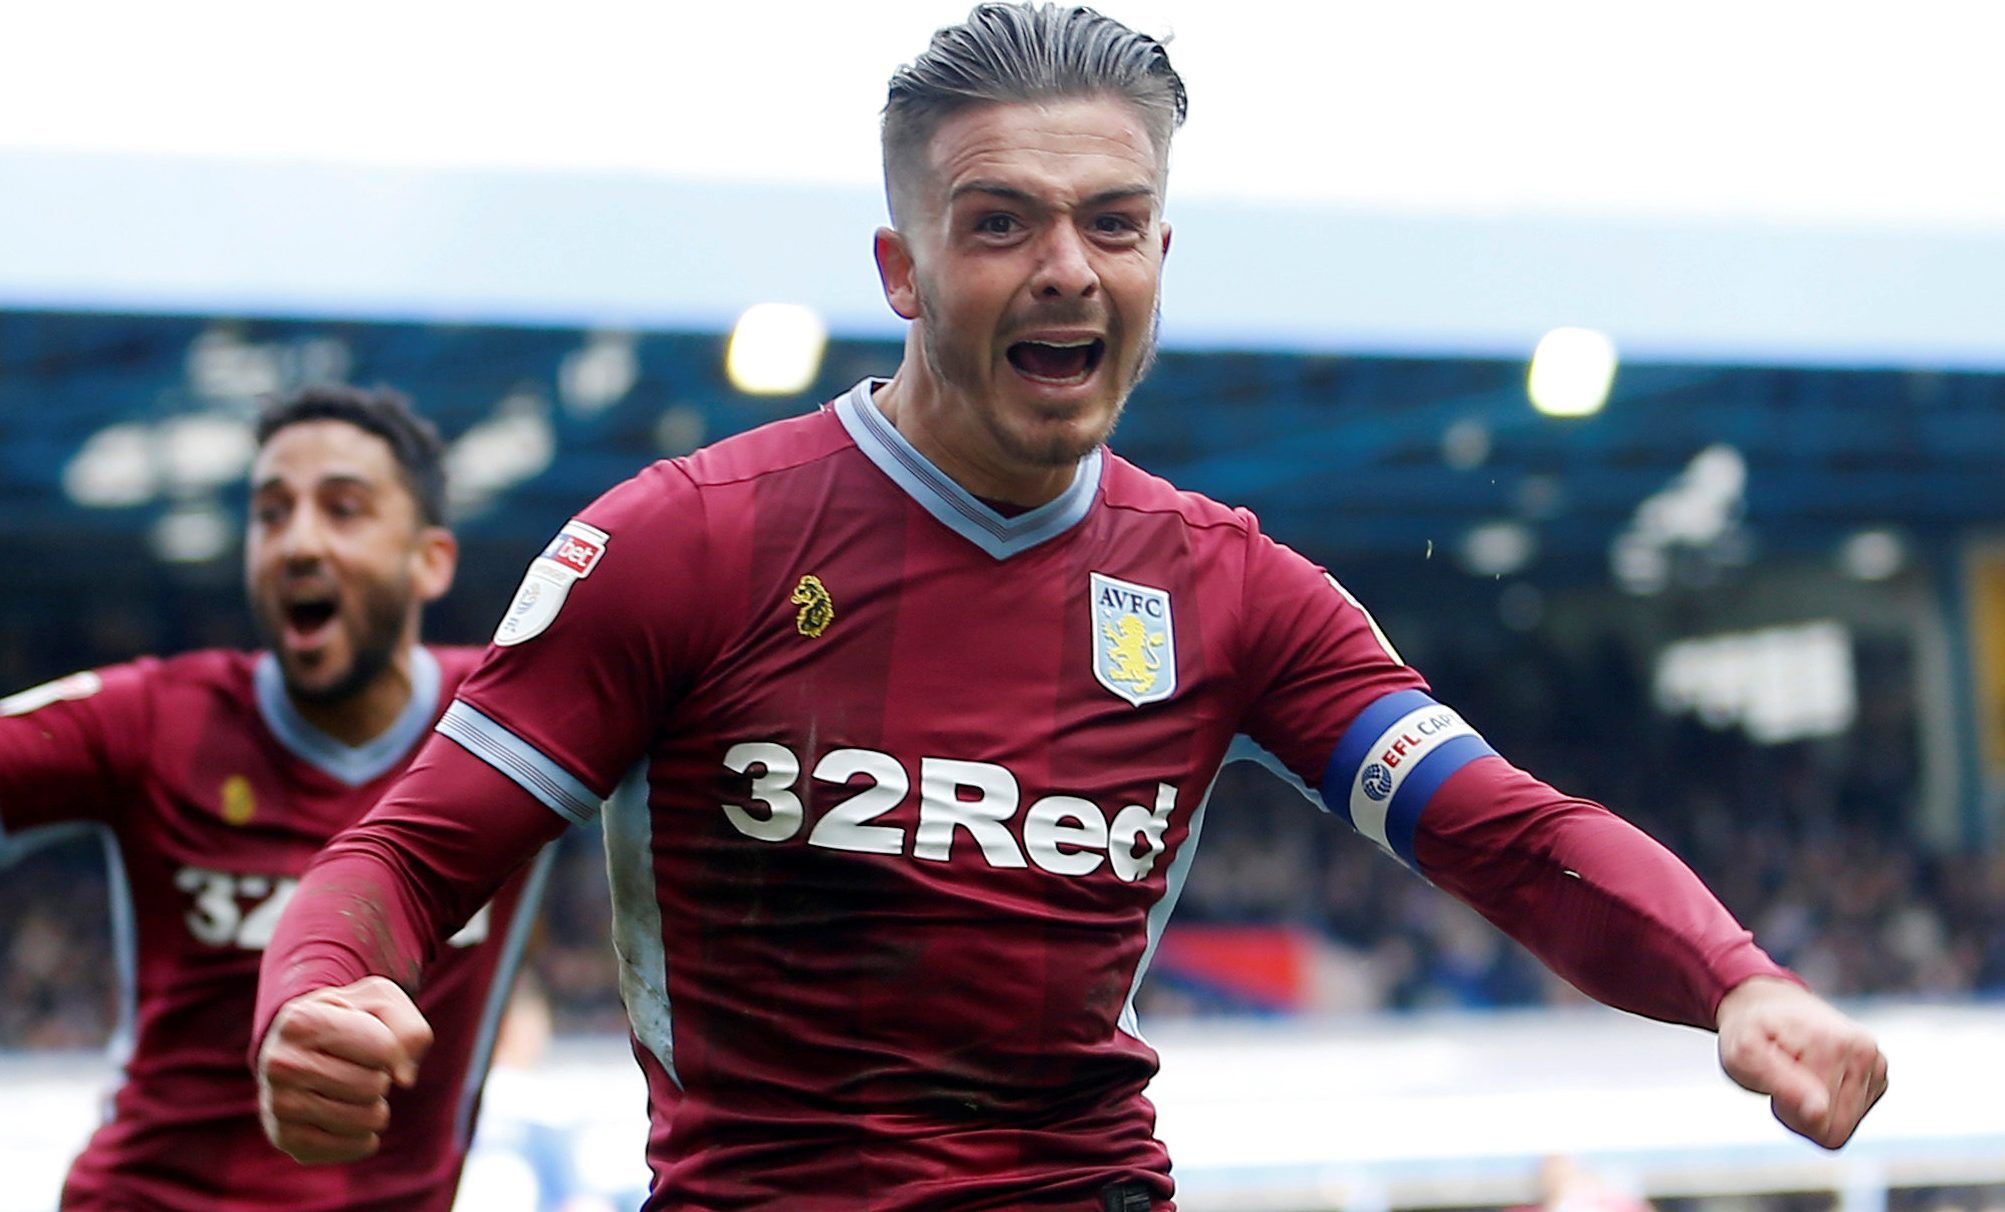 Soccer Football - Championship - Birmingham City v Aston Villa - St Andrew's, Birmingham, Britain - March 10, 2019   Aston Villa's Jack Grealish celebrates scoring their first goal    Action Images via Reuters/Craig Brough    EDITORIAL USE ONLY. No use with unauthorized audio, video, data, fixture lists, club/league logos or 